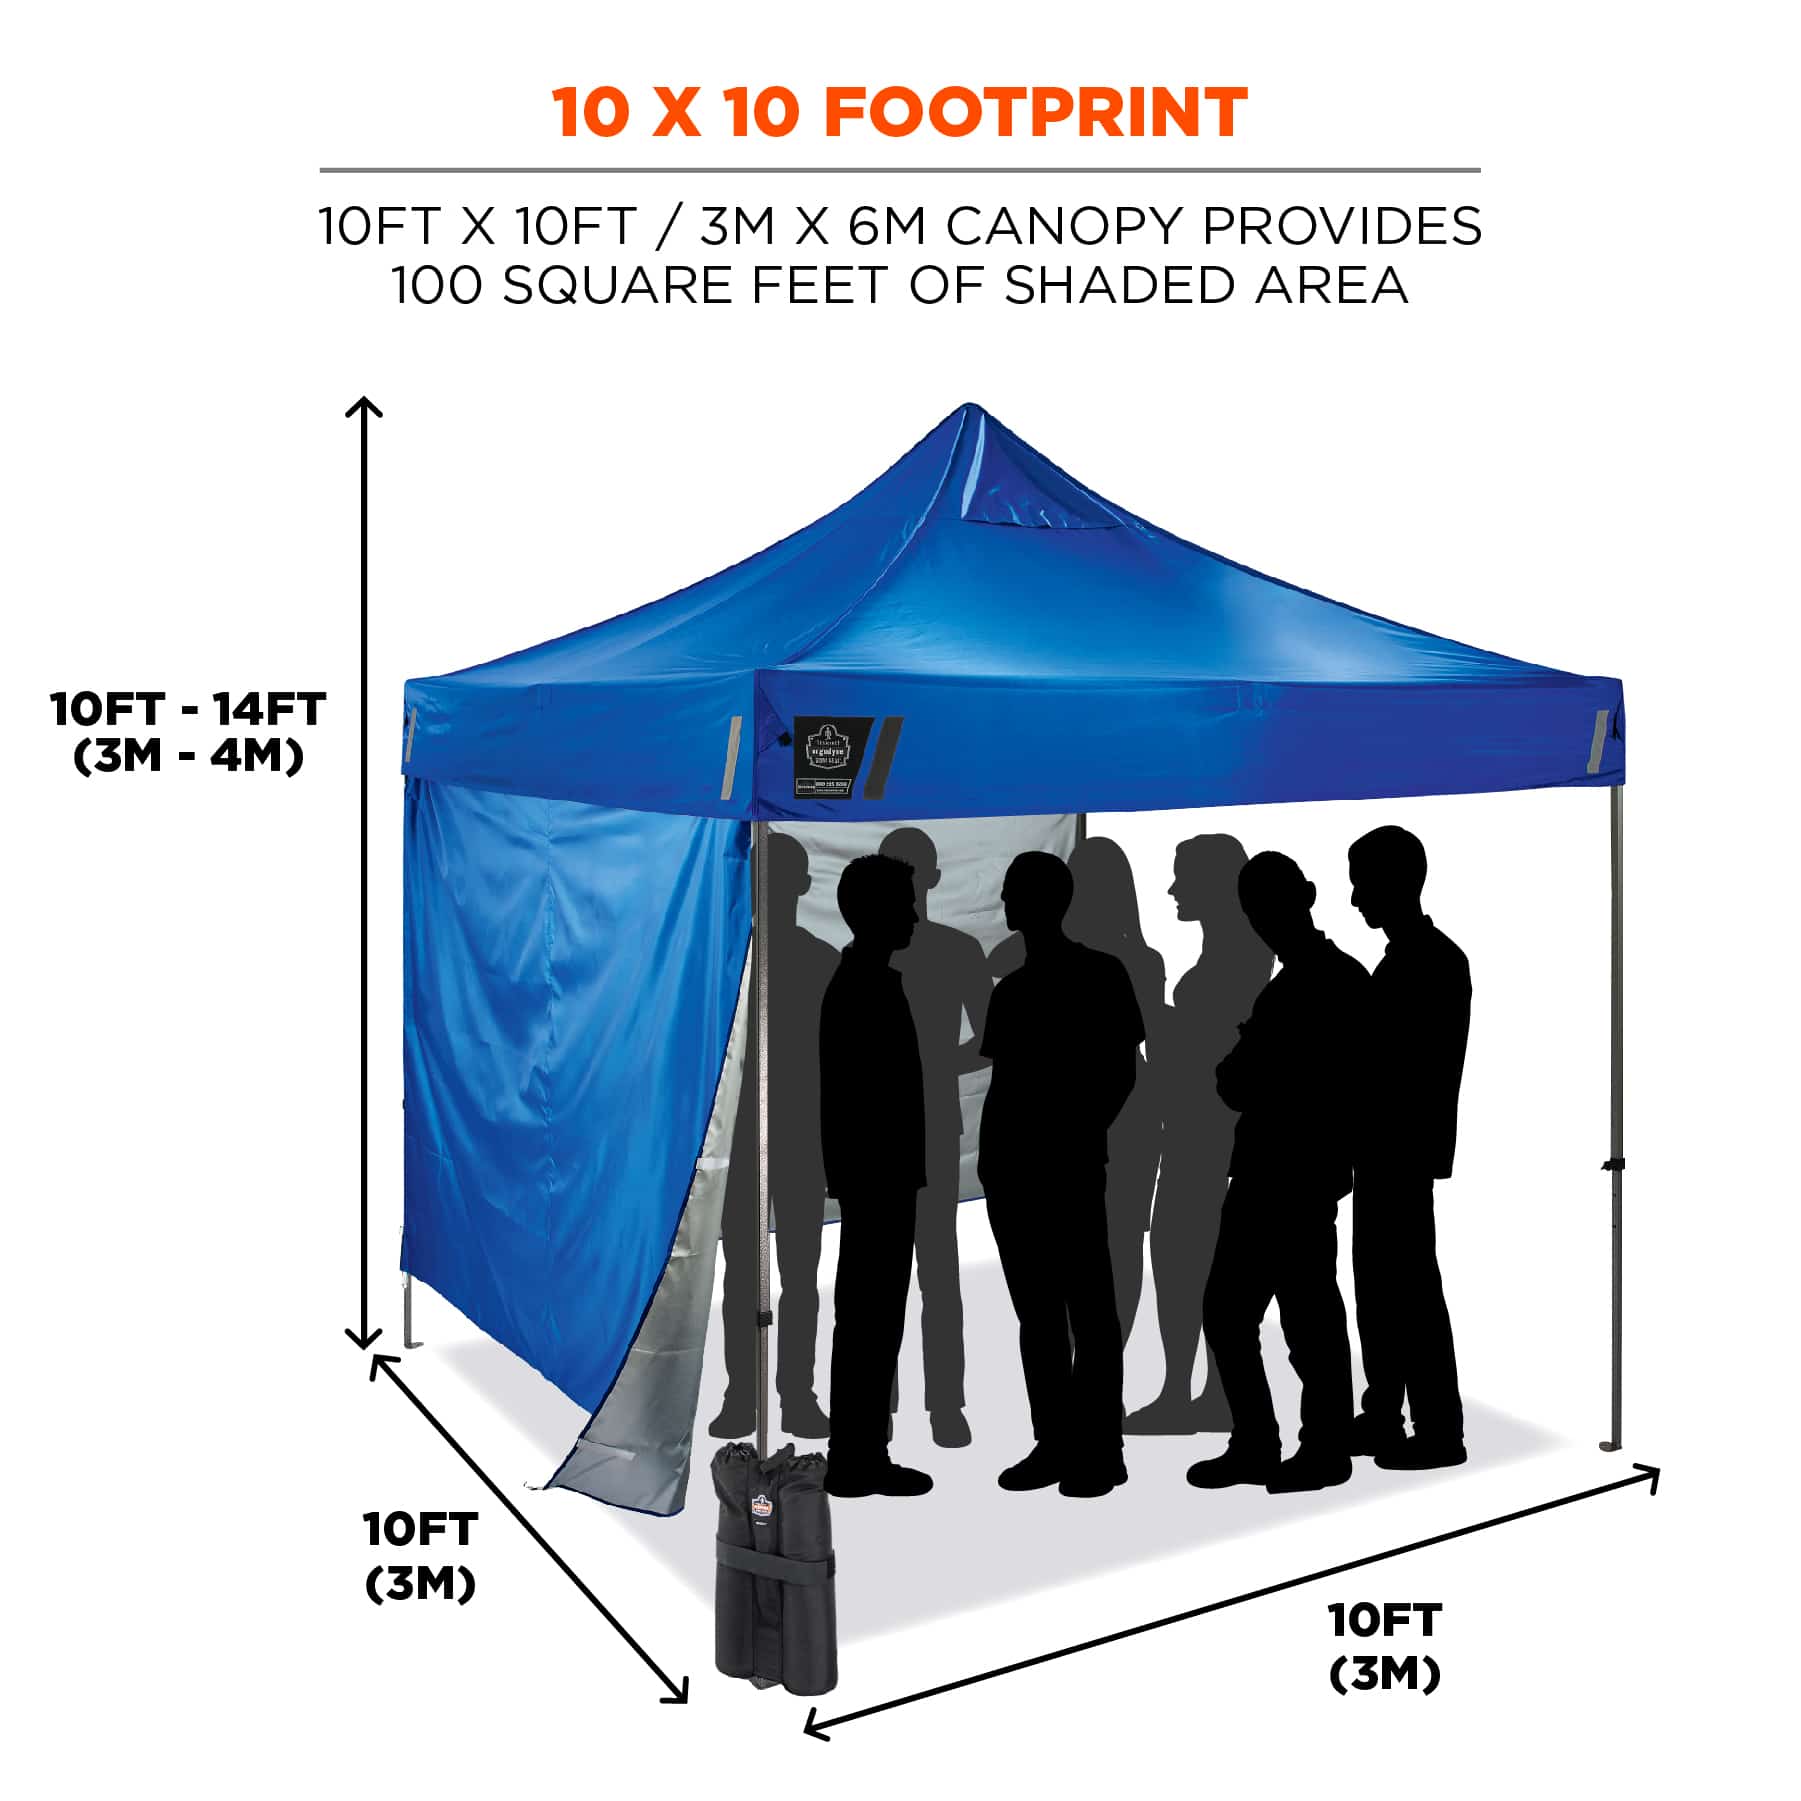 Heavy-Duty Pop-Up Tent Kit - 10ft x 10ft - Temporary Enclosures